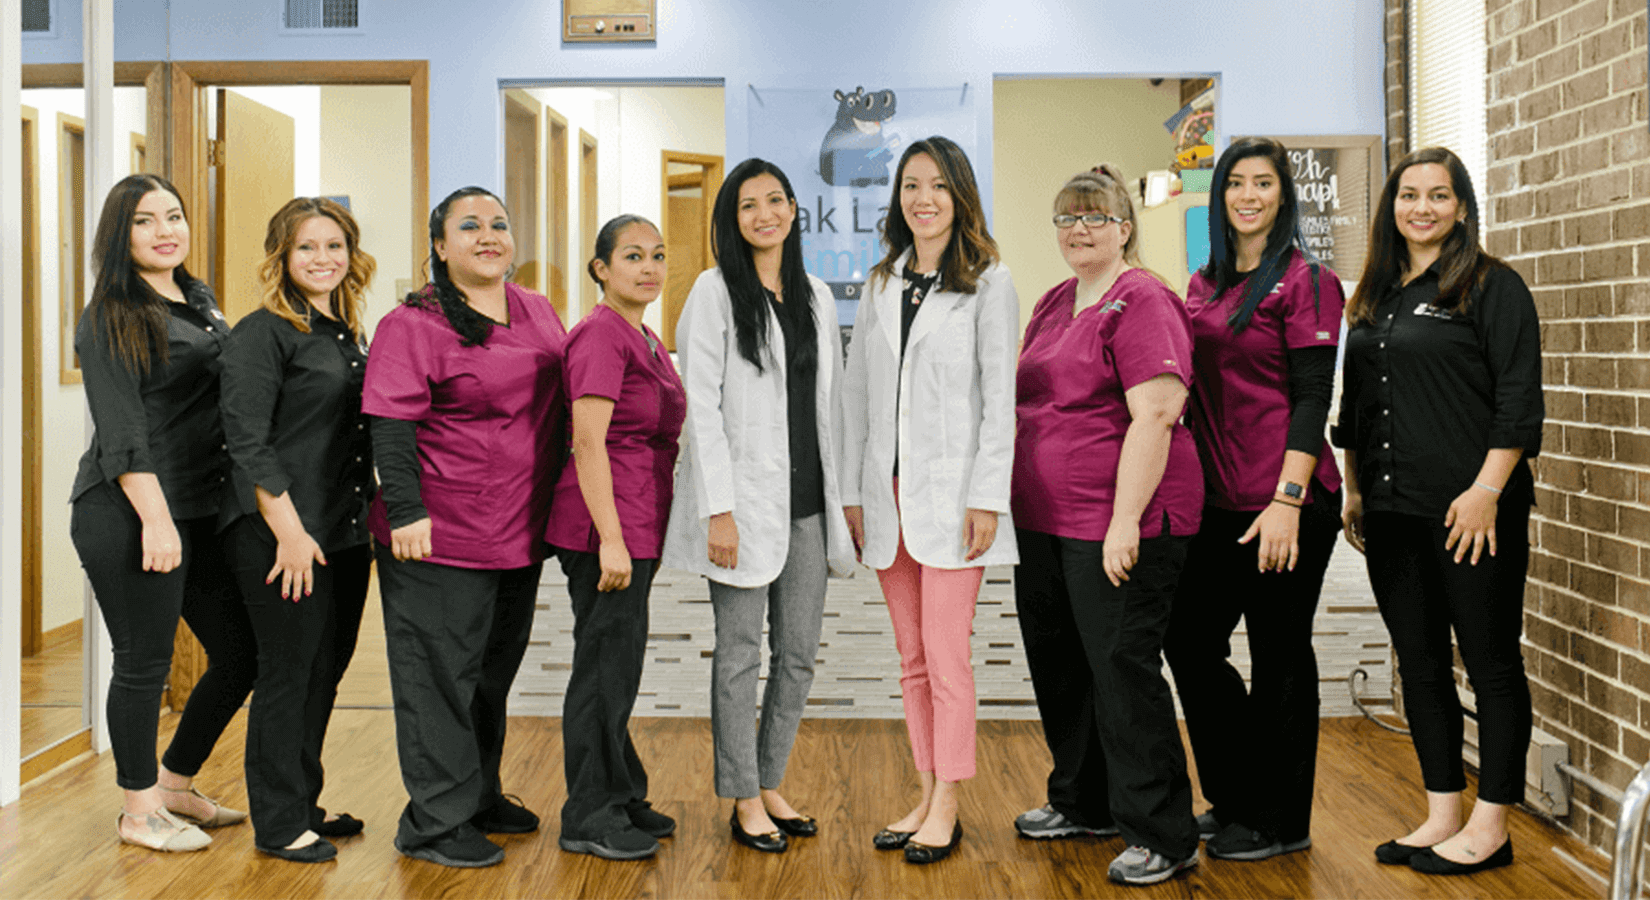 Our Dental Professionals in Oak Lawn